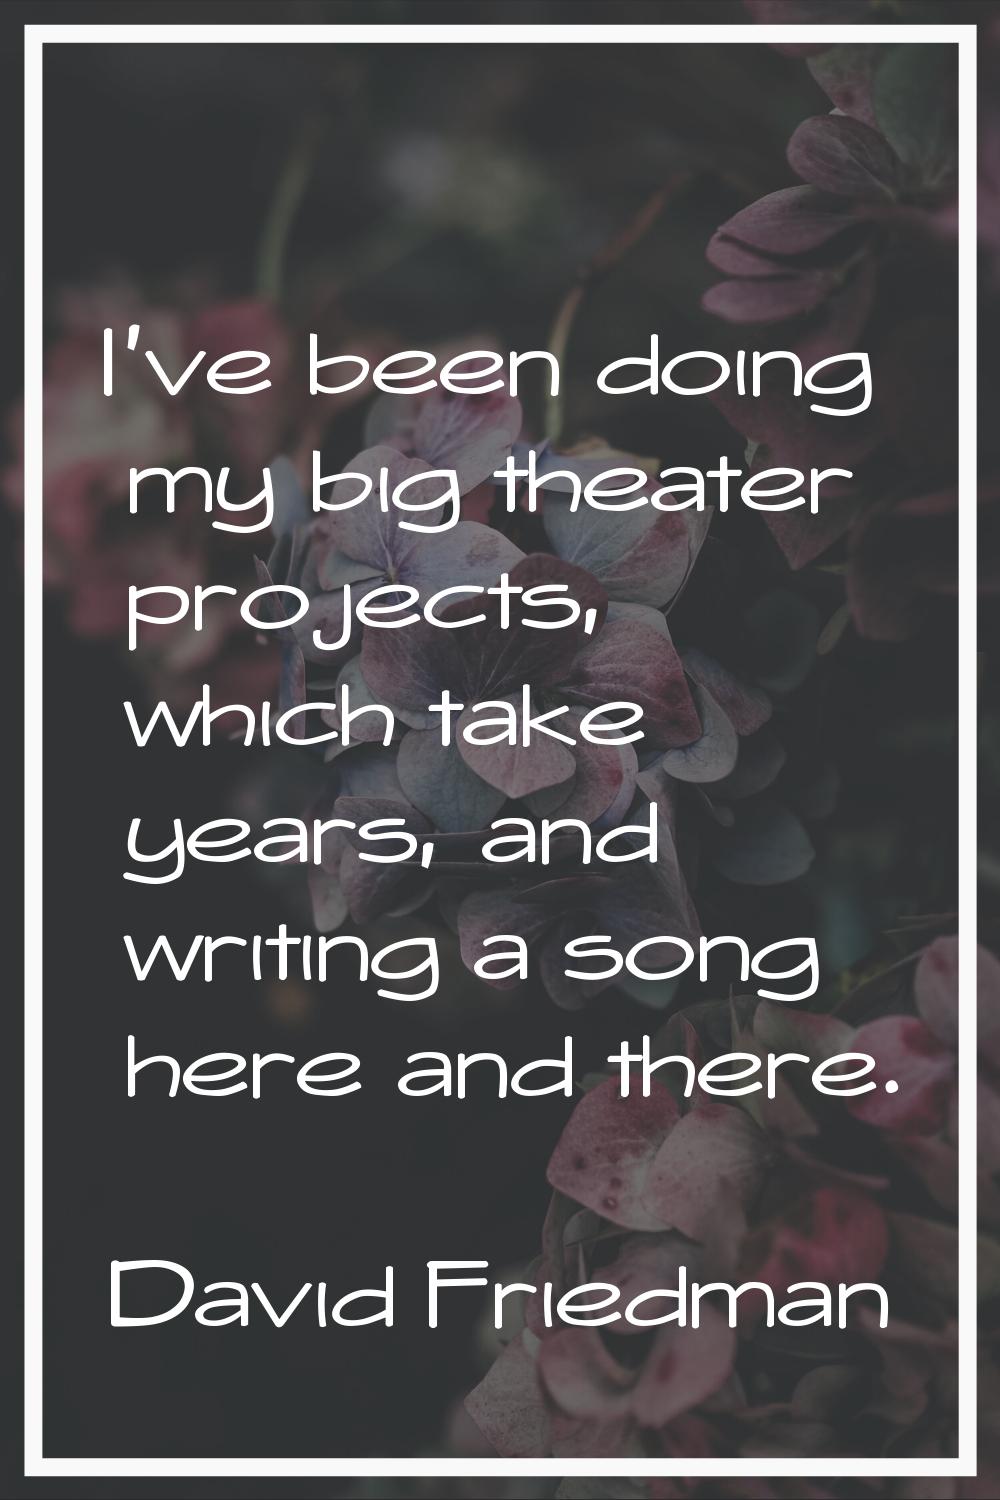 I've been doing my big theater projects, which take years, and writing a song here and there.